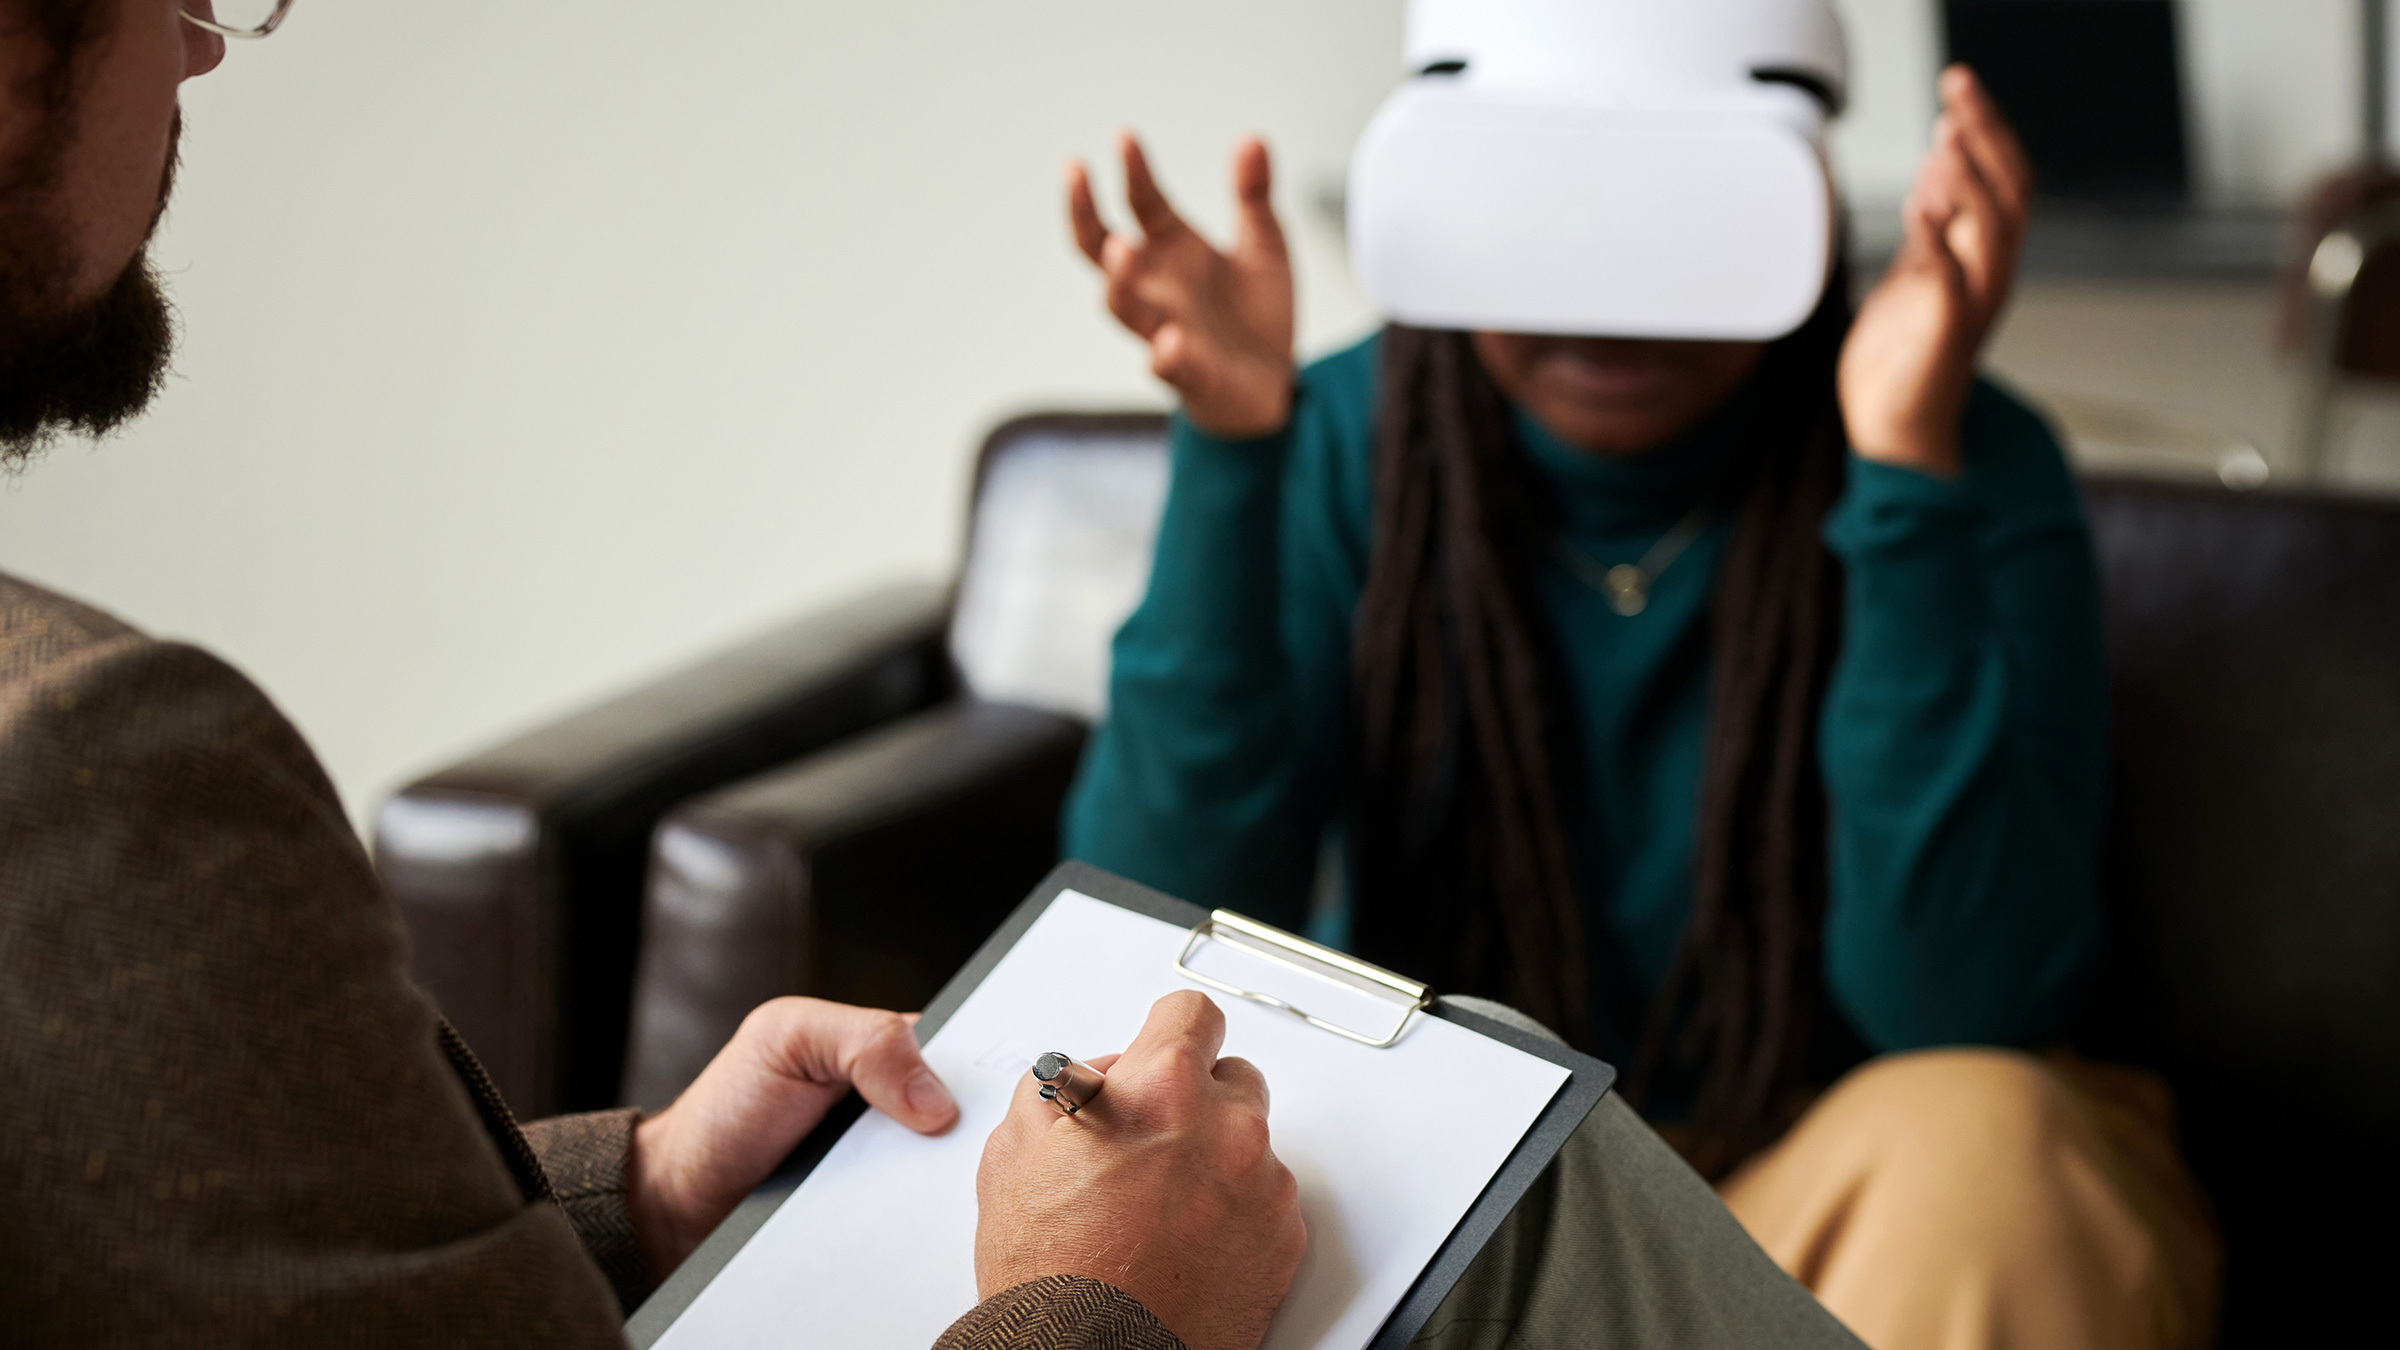 seated person wearing a VR headset gestures in front of a seated man taking notes